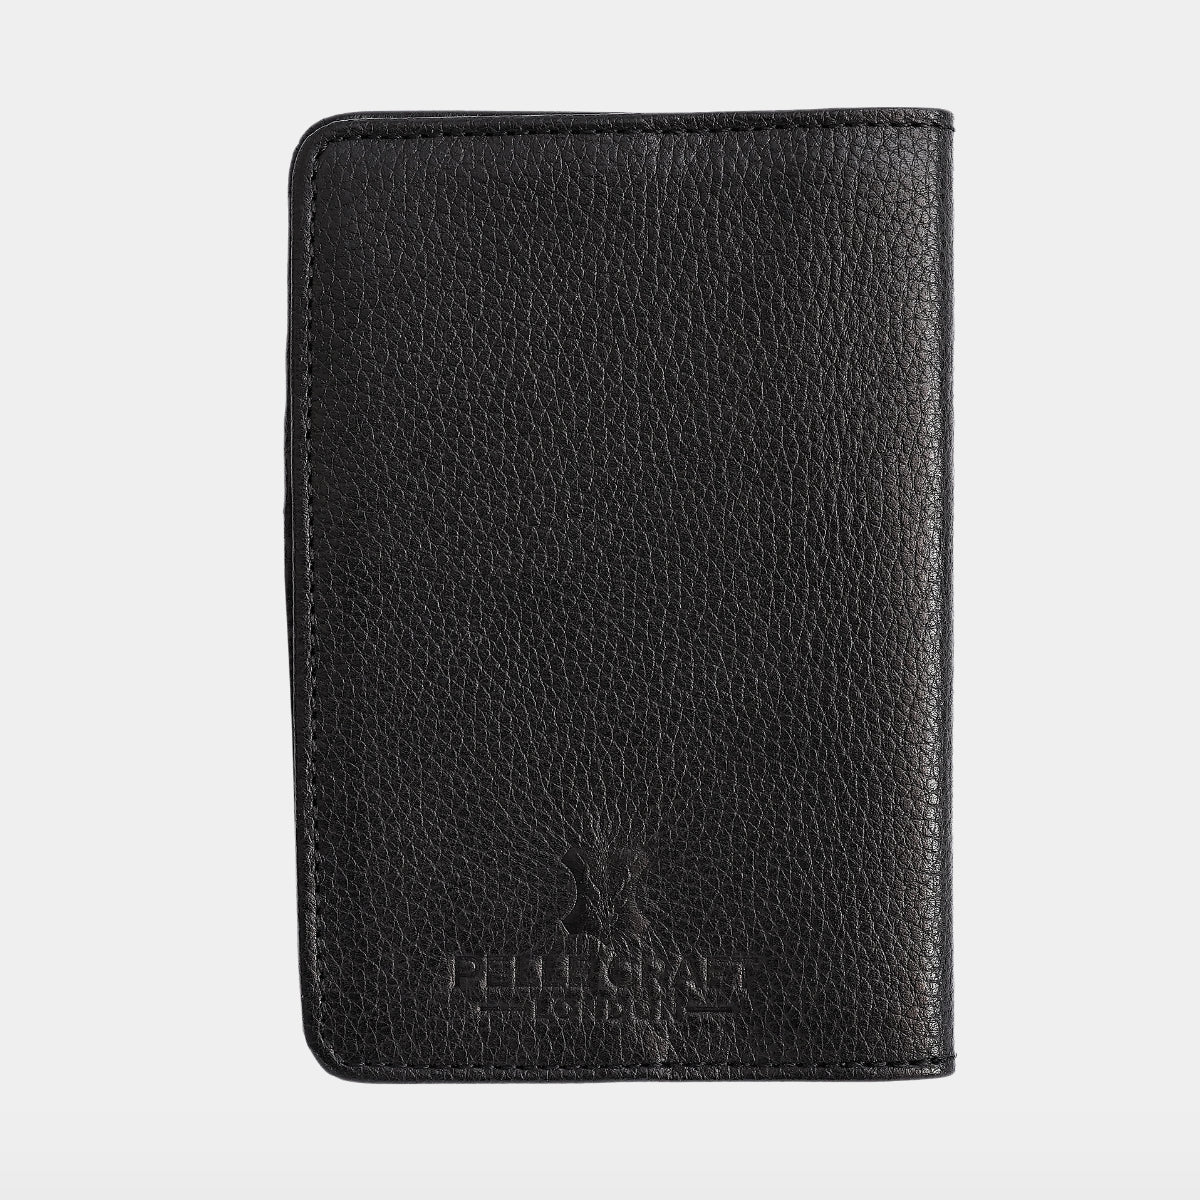 Passport Cover with Card Slots & Luggage Tag